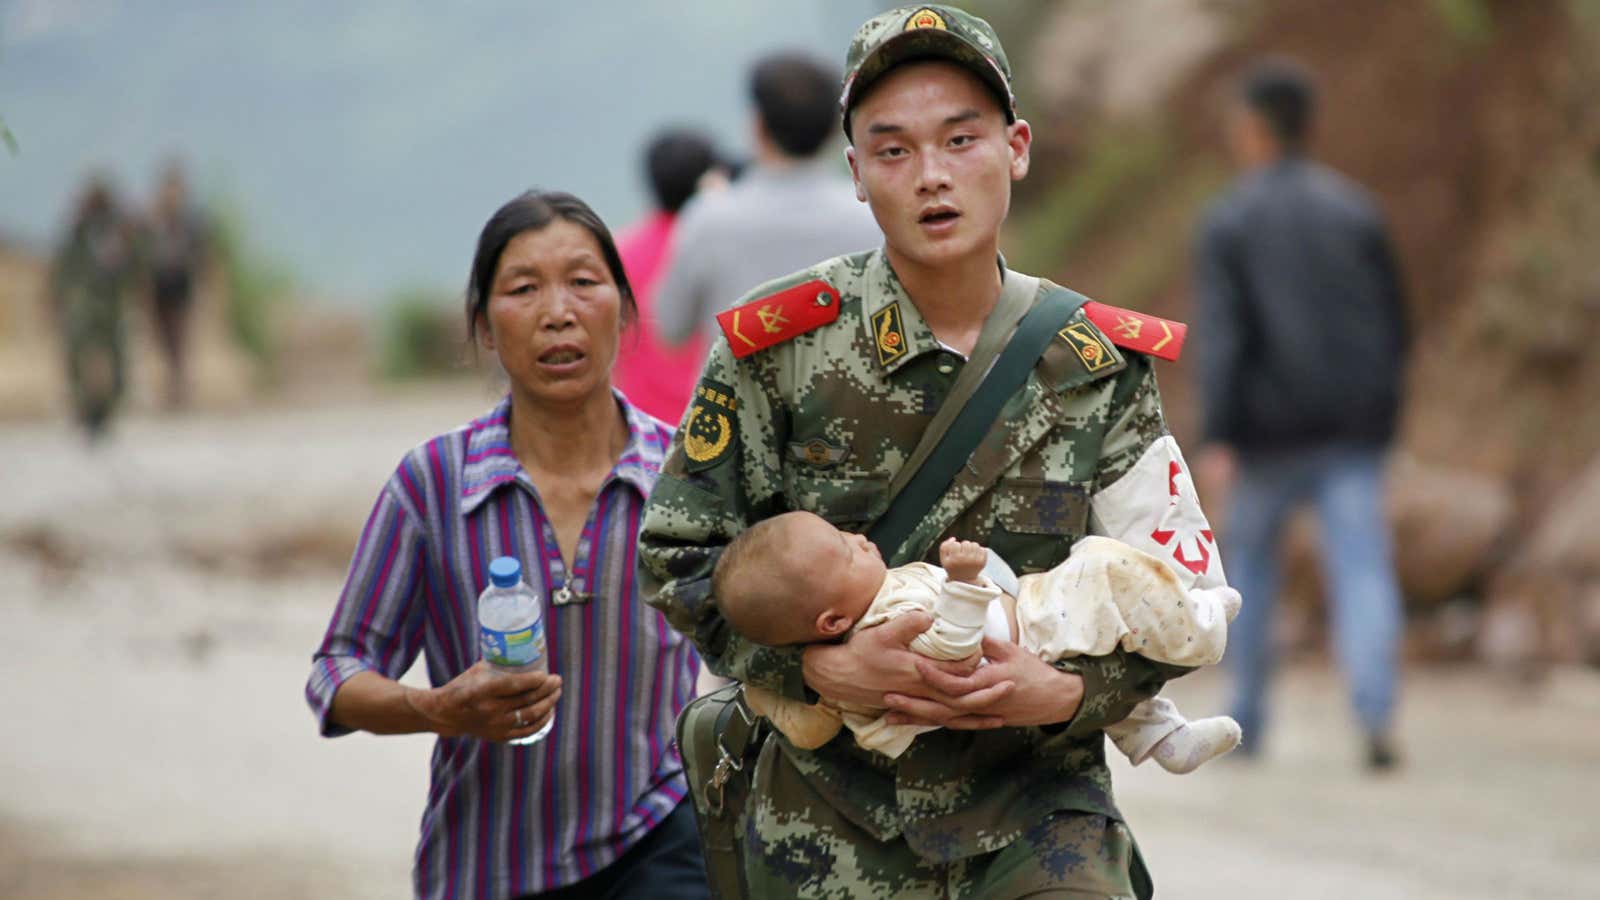 A policeman carries a baby after an earthquake hit southwest China on Sunday, killing at least 381 people.